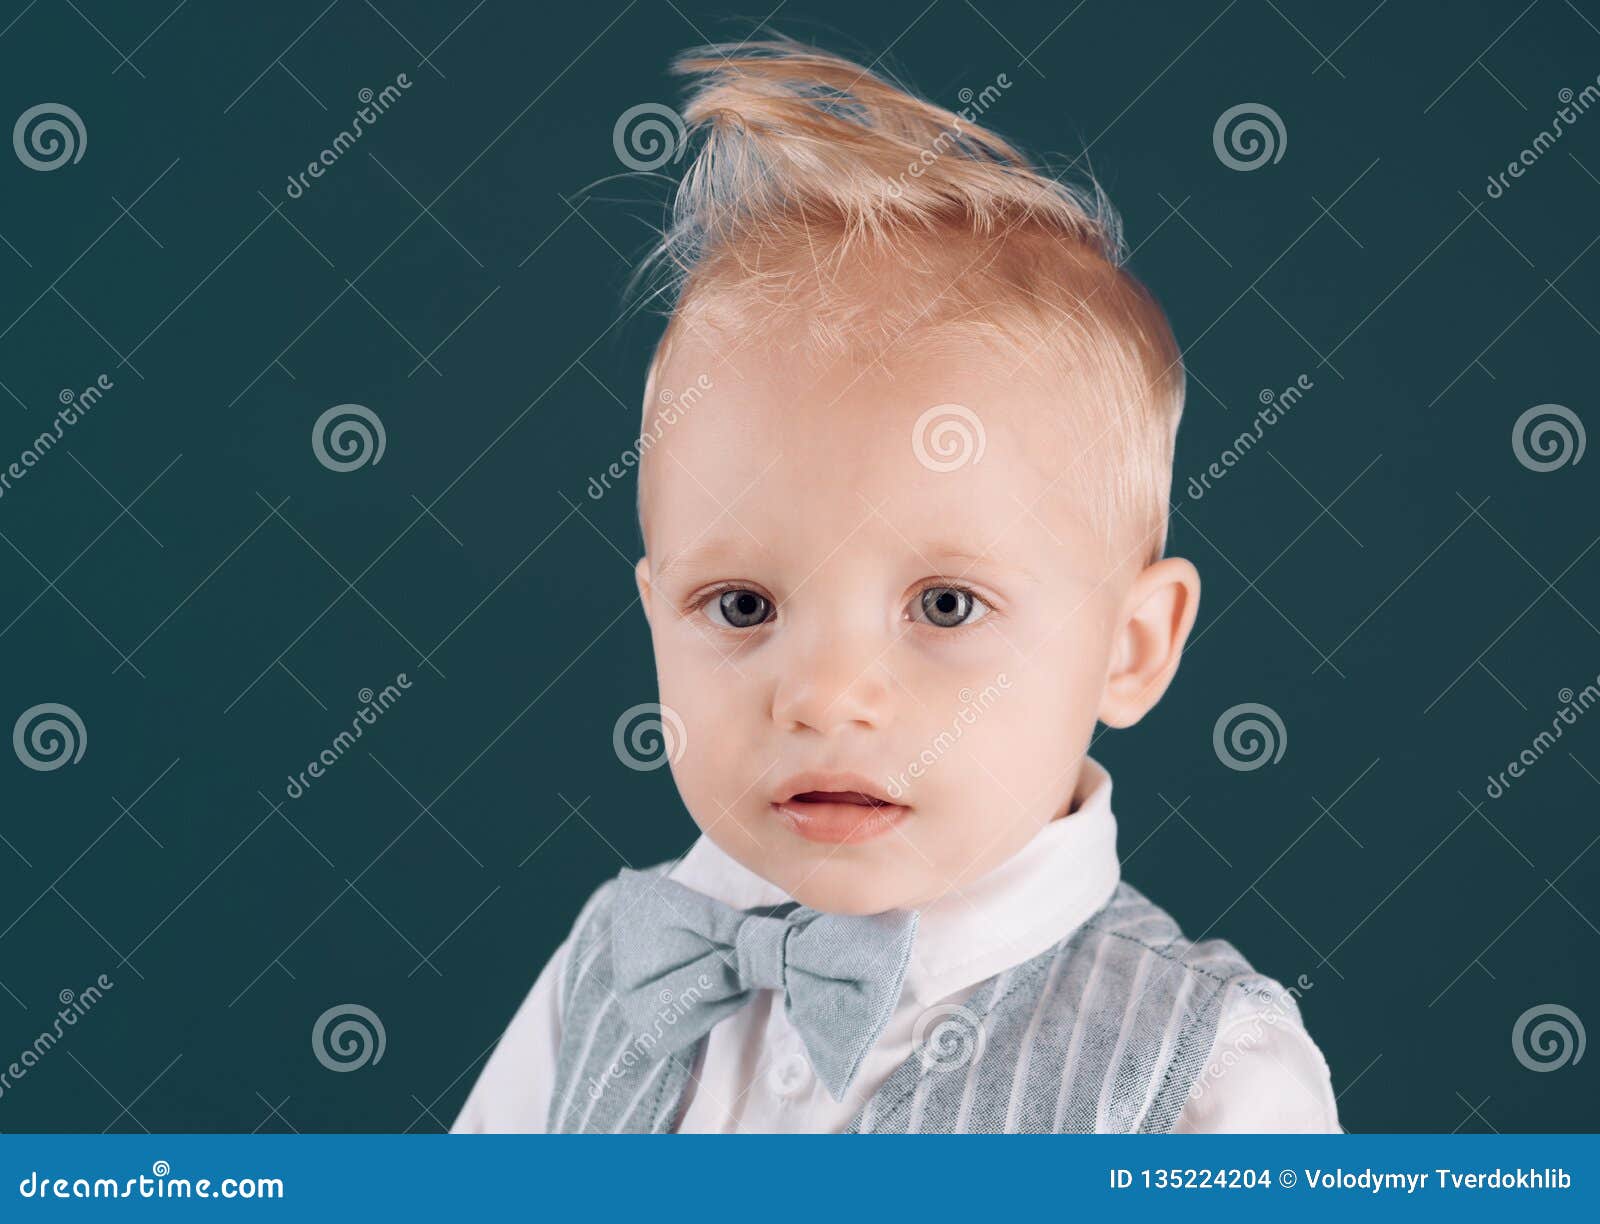 Haircut, always Going To Be in Style. Little Child with Messy Top Haircut. Boy  Child with Stylish Blond Hair Stock Photo - Image of barbershop, hairstyle:  135224204